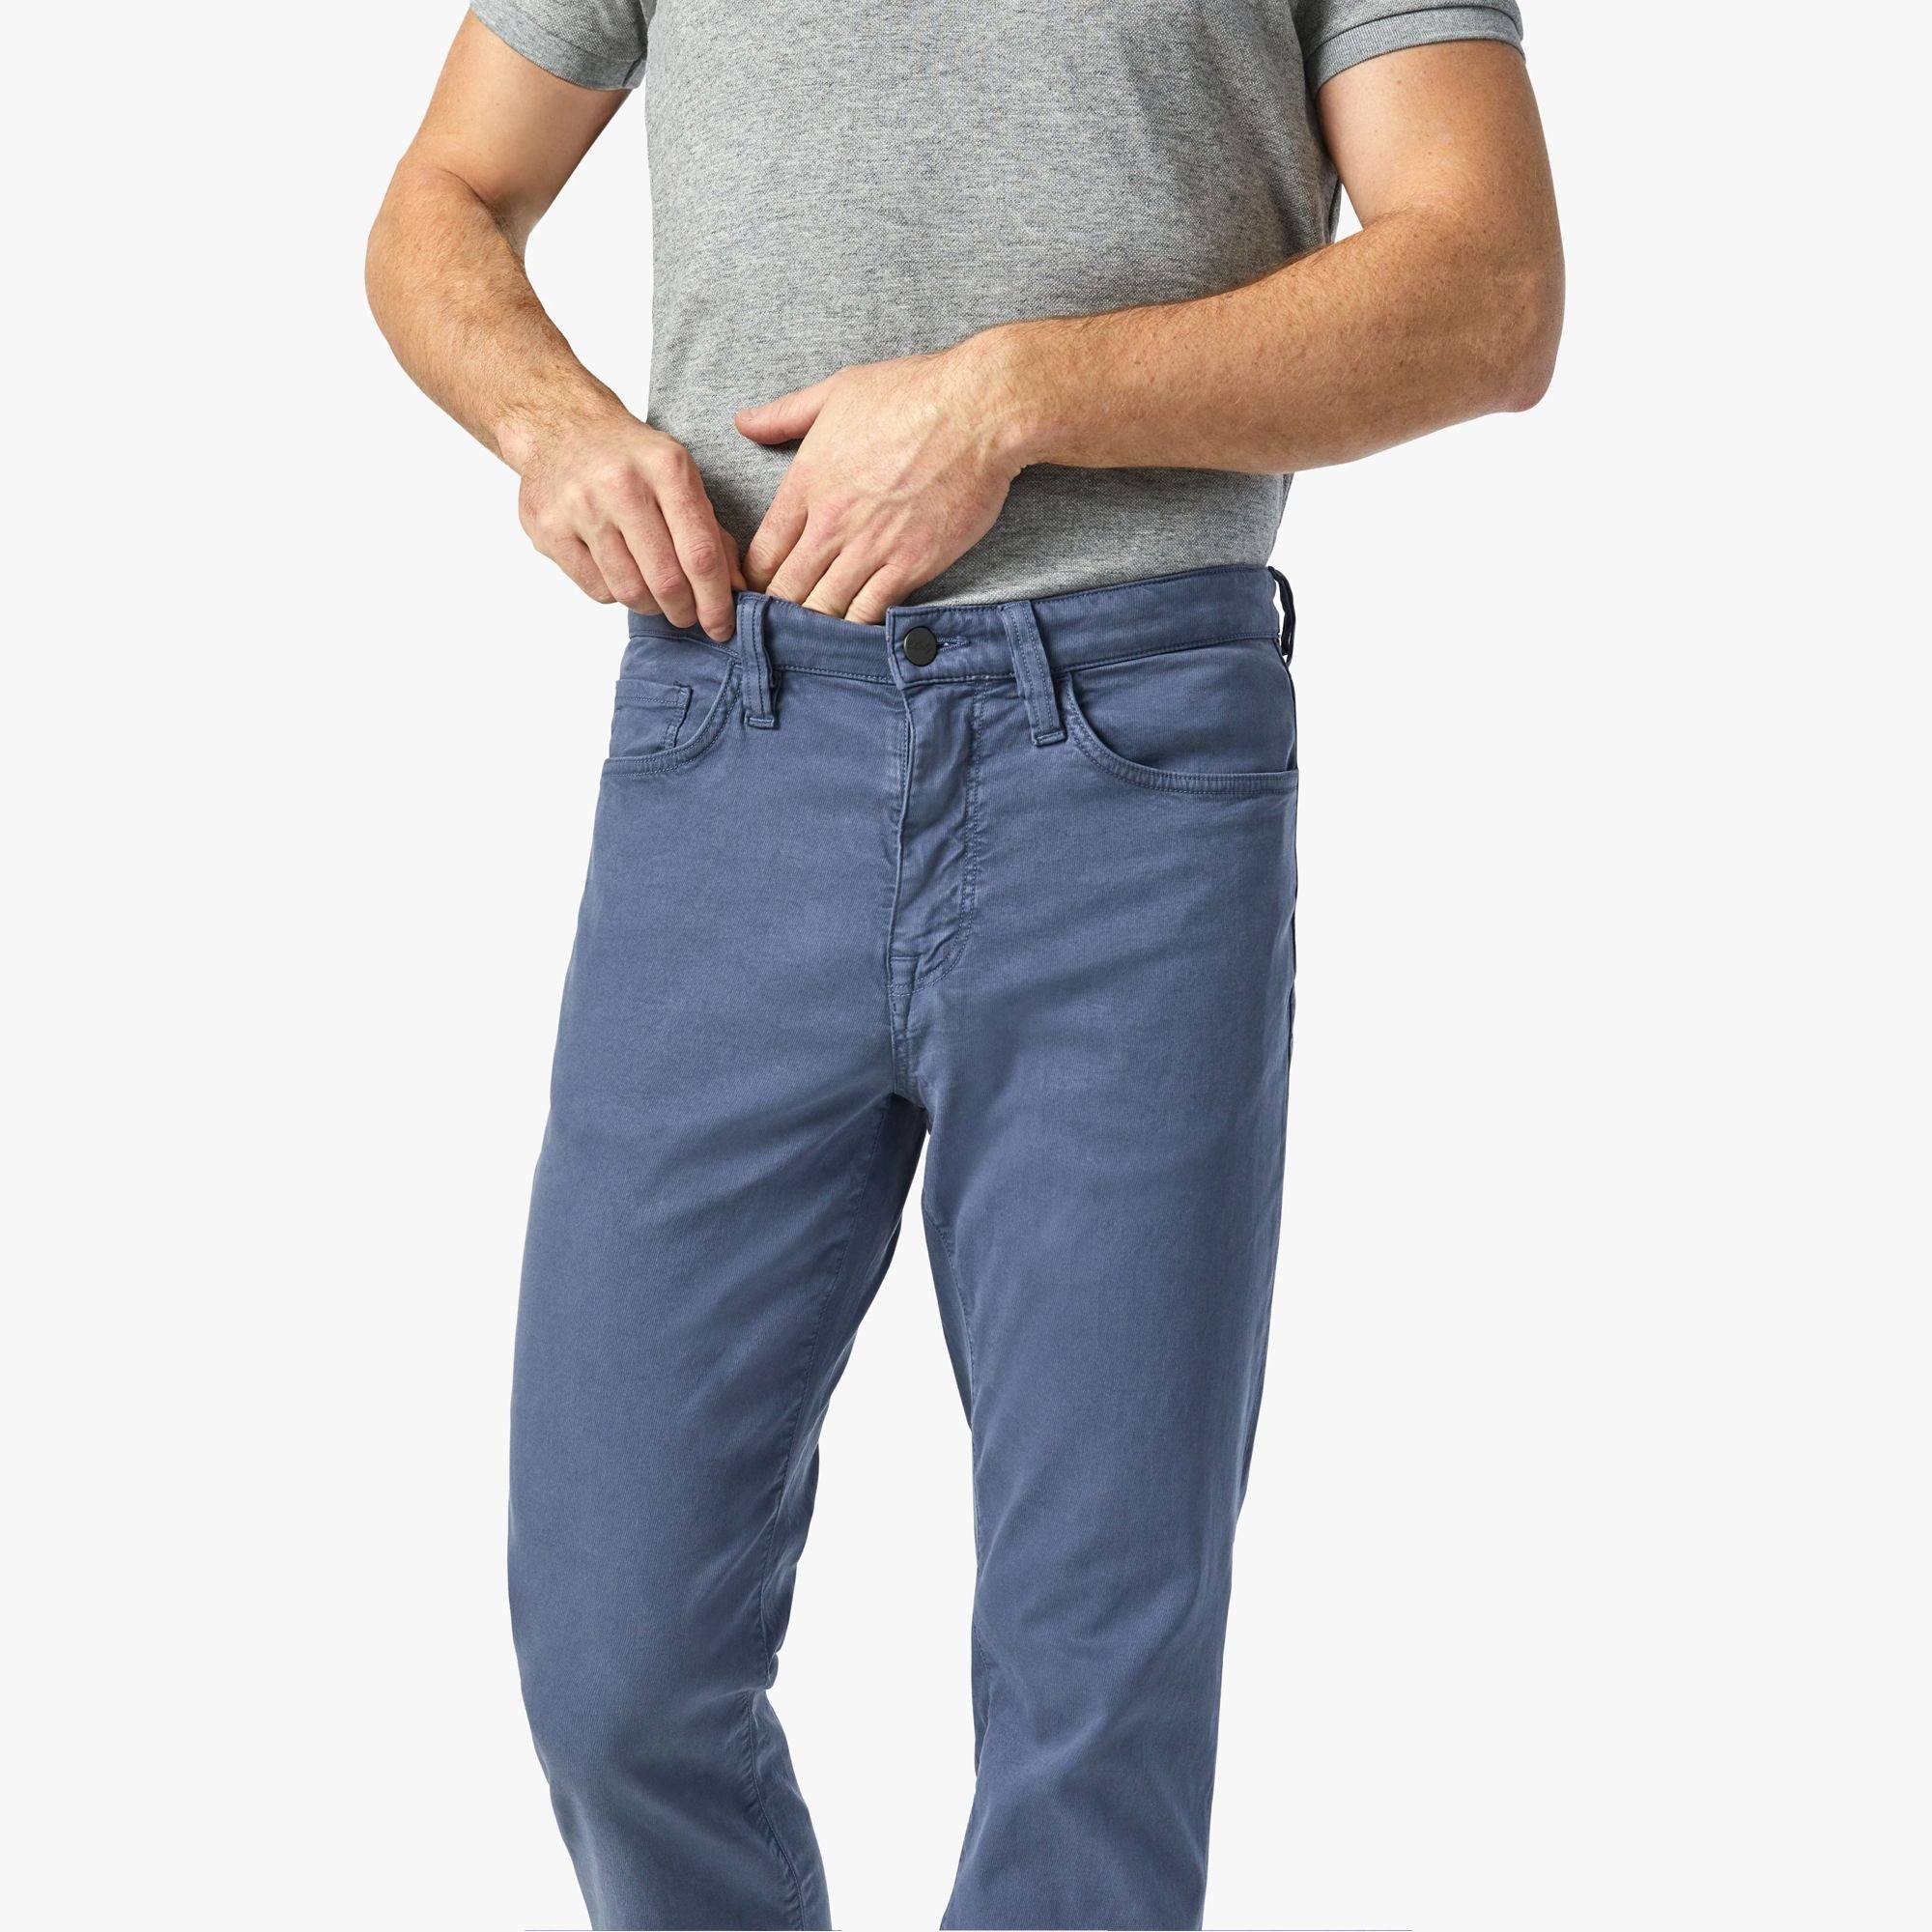 Charisma Relaxed Straight Pant in Horizon Soft Touch (Size 33 x 32) by 34 Heritage